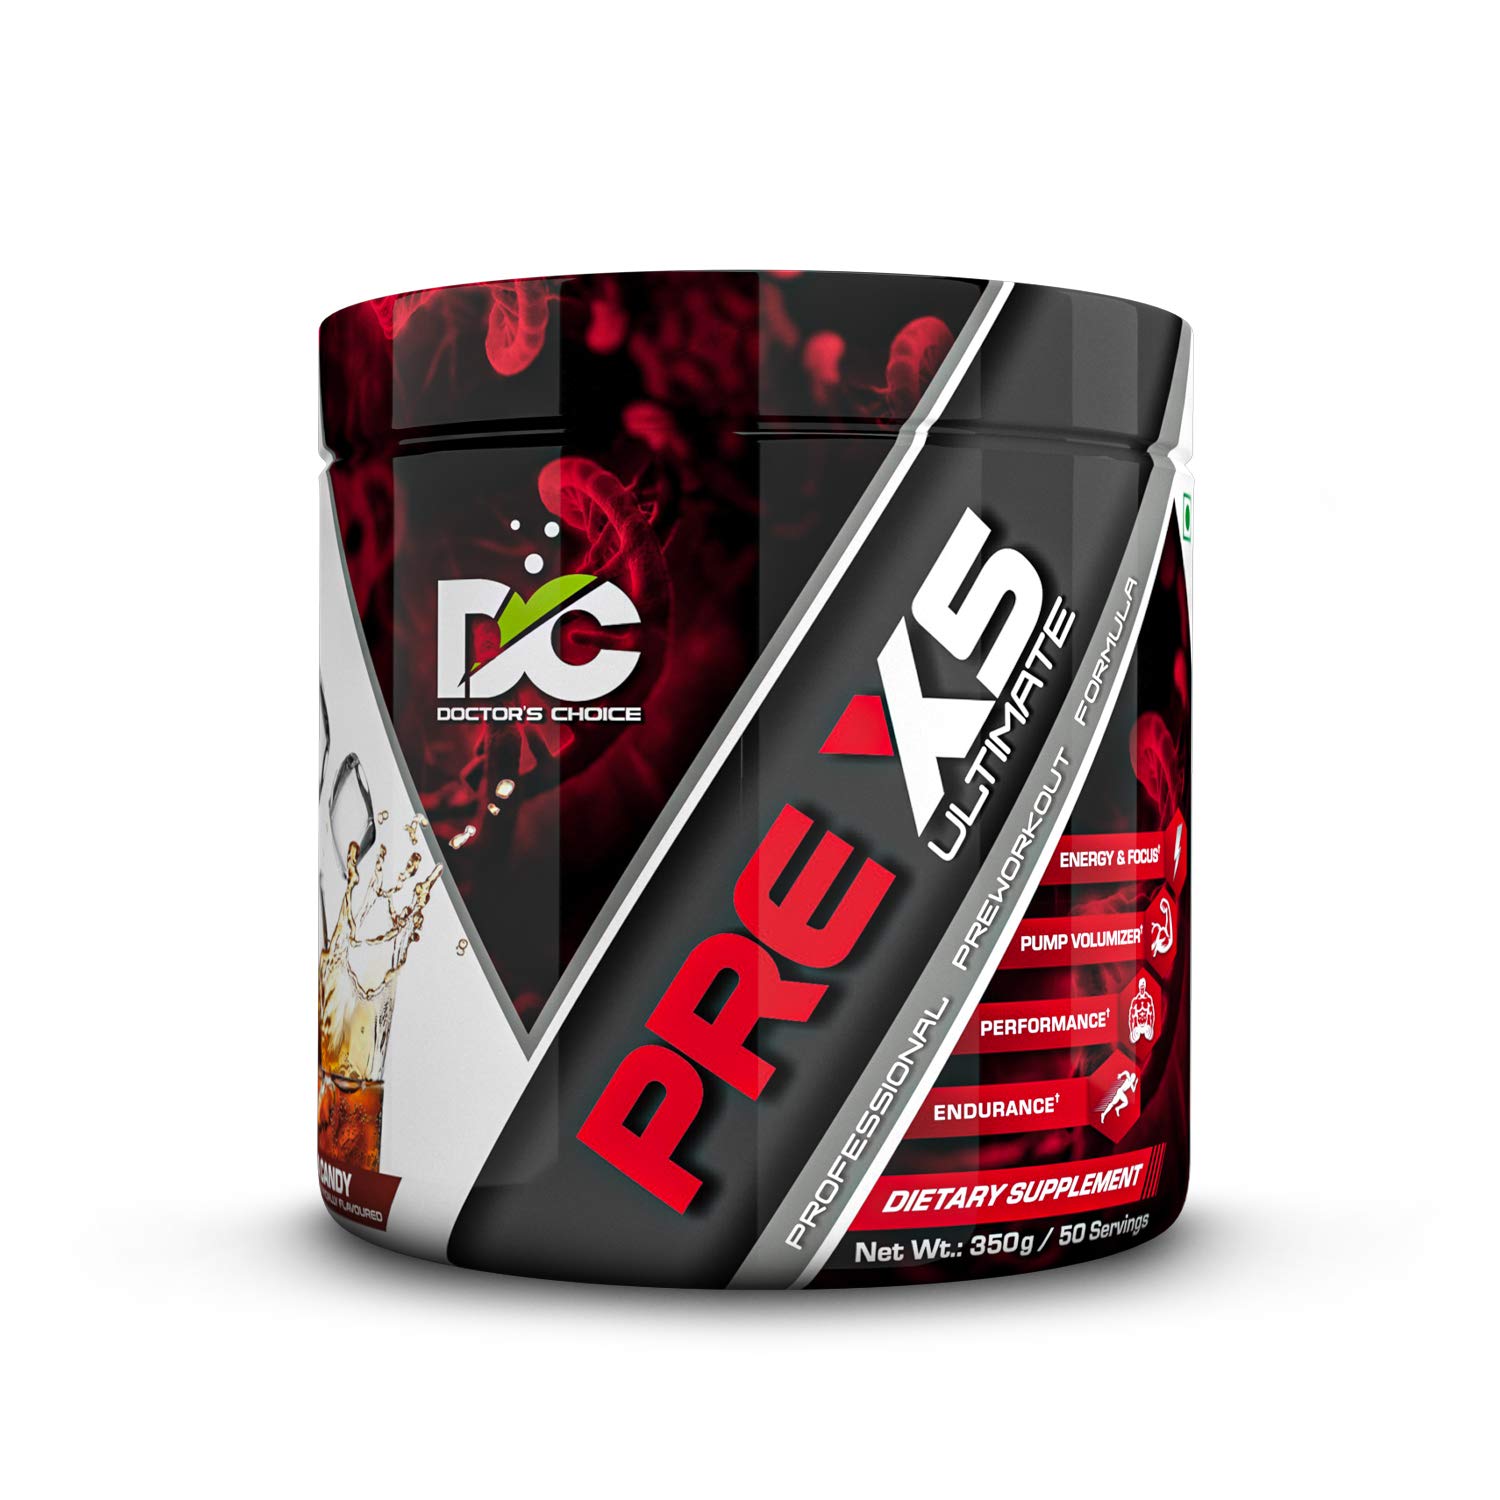 Doctor's Choice PRE-X5 Ultimate Professional Pre-Workout